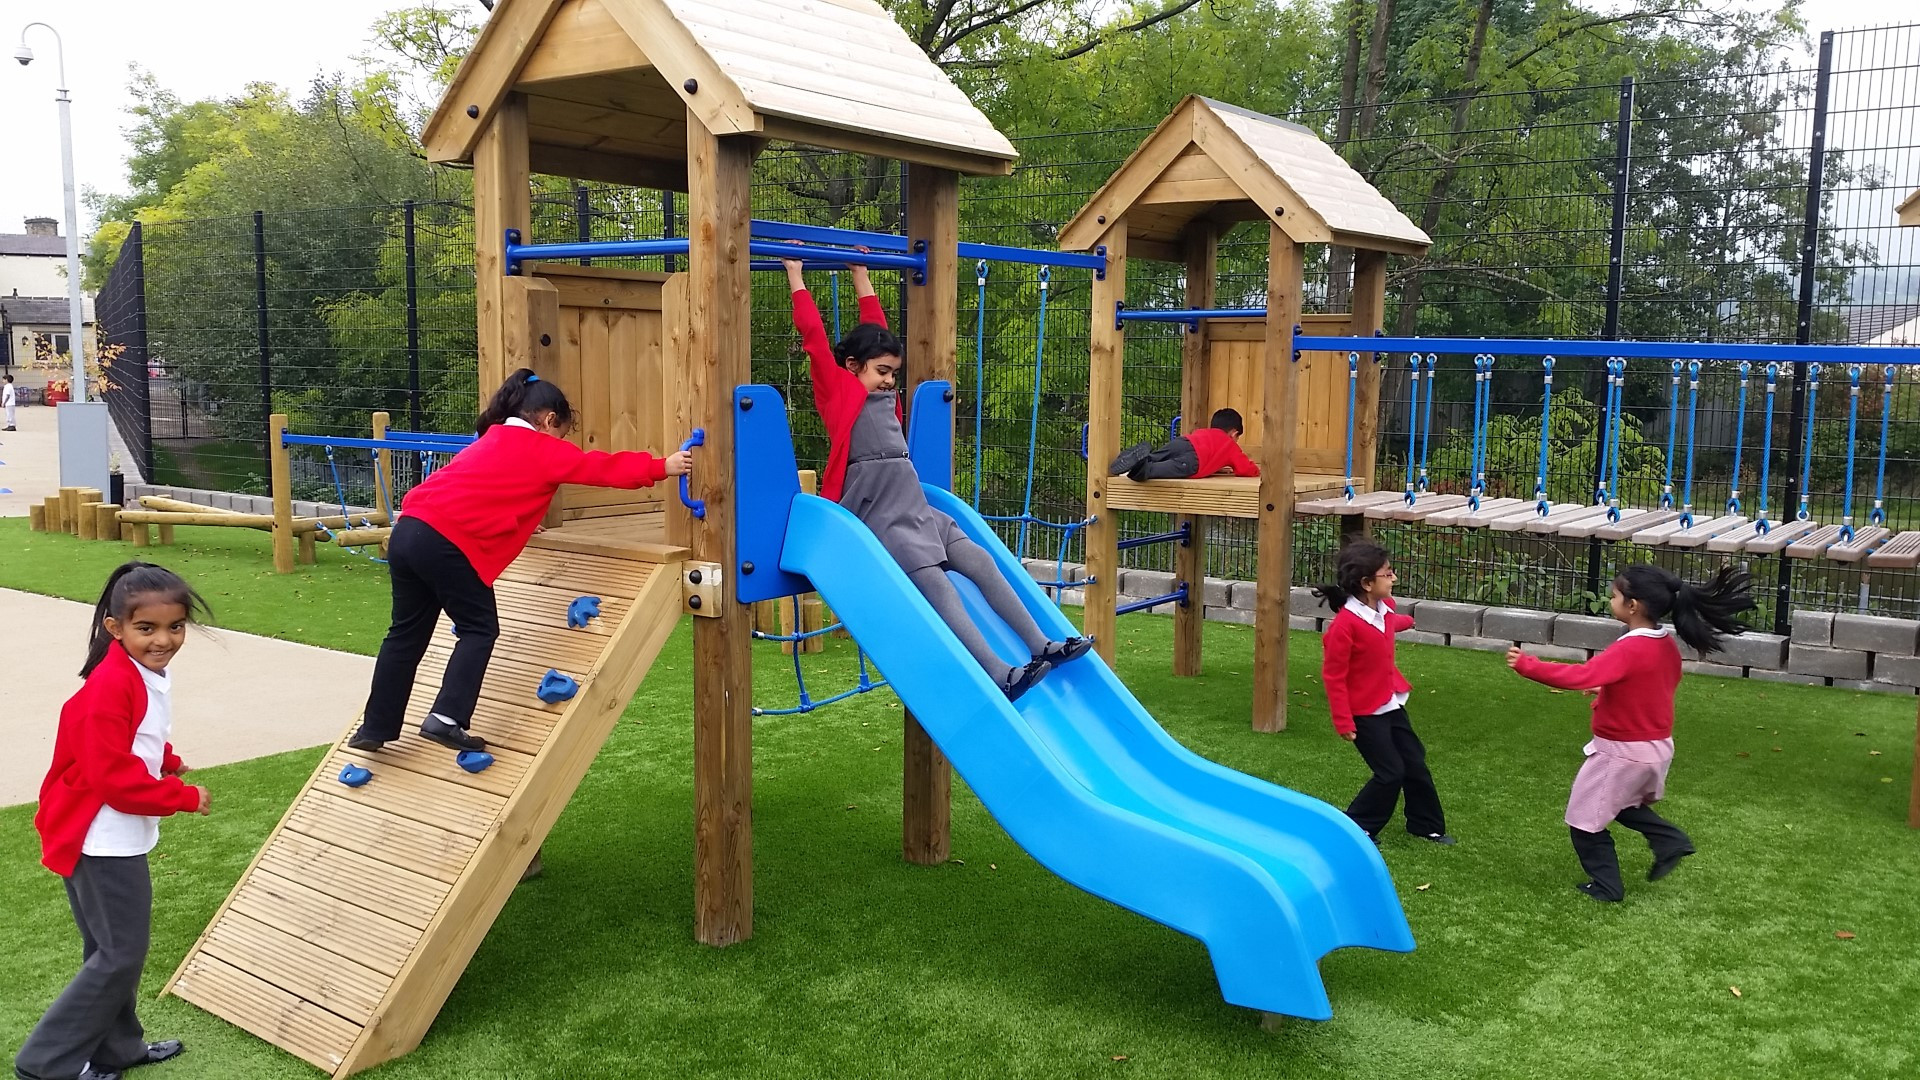 Outdoor Playground For Kids
 How Outdoor Play Can Improve Children s Sleep